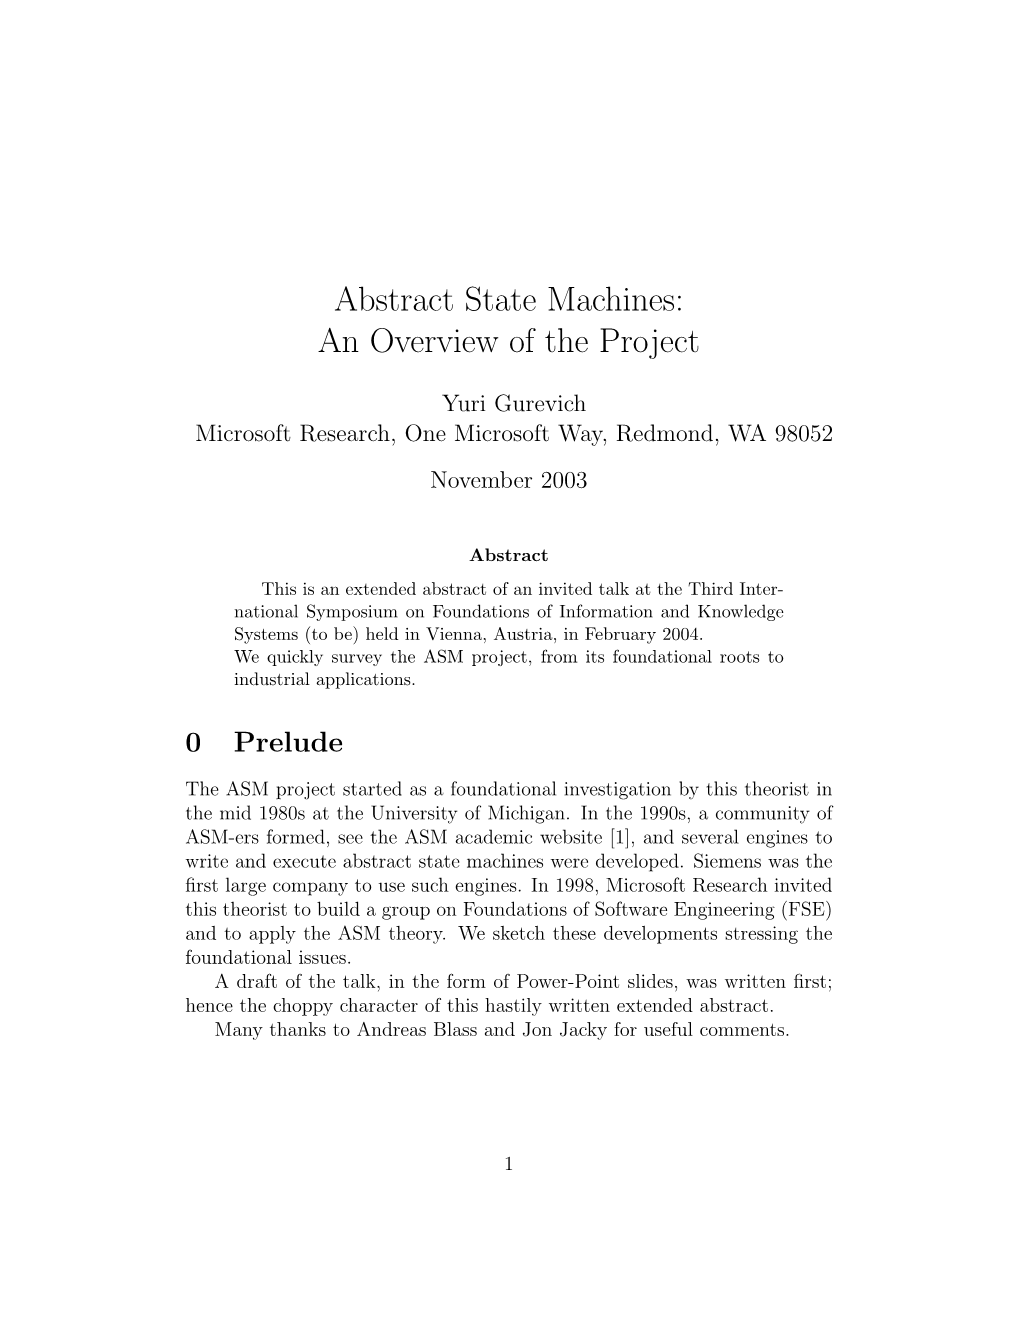 Abstract State Machines: an Overview of the Project